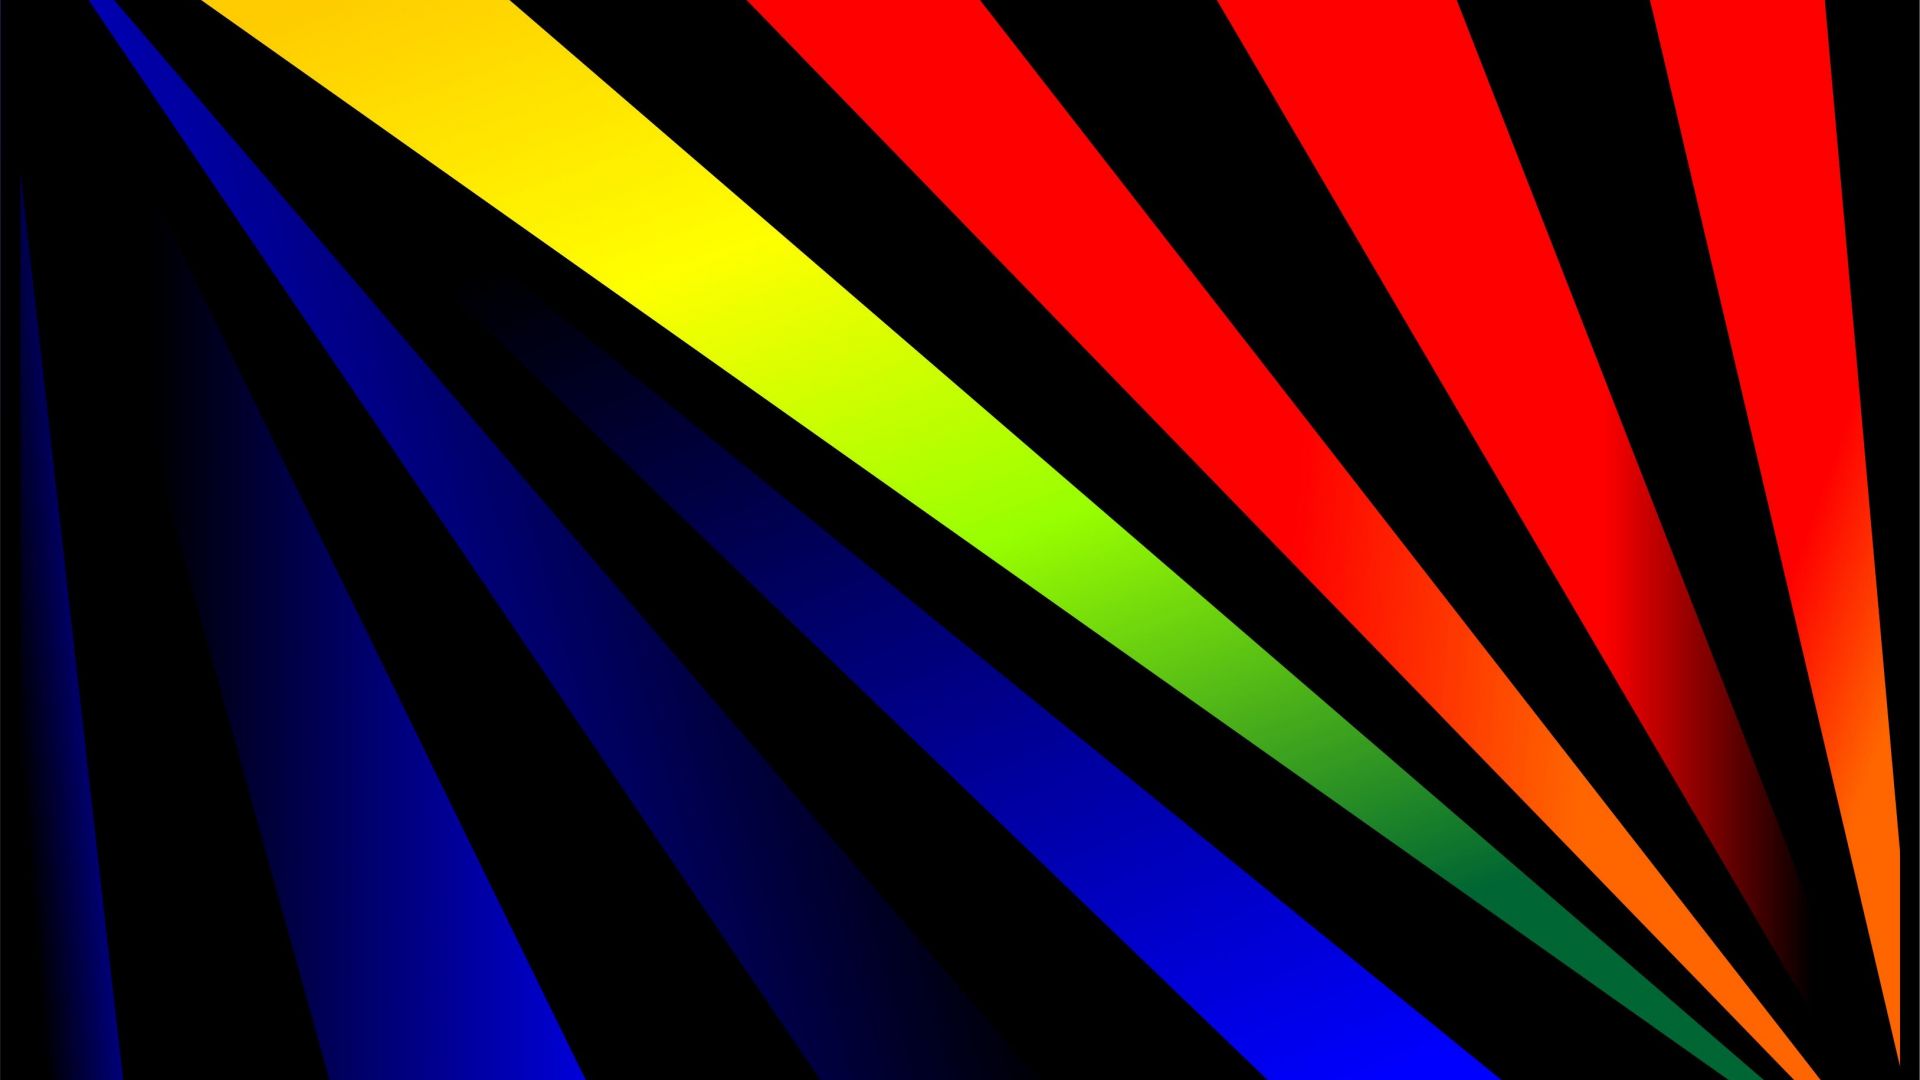 Wallpaper Graphic design, stripes, abstract